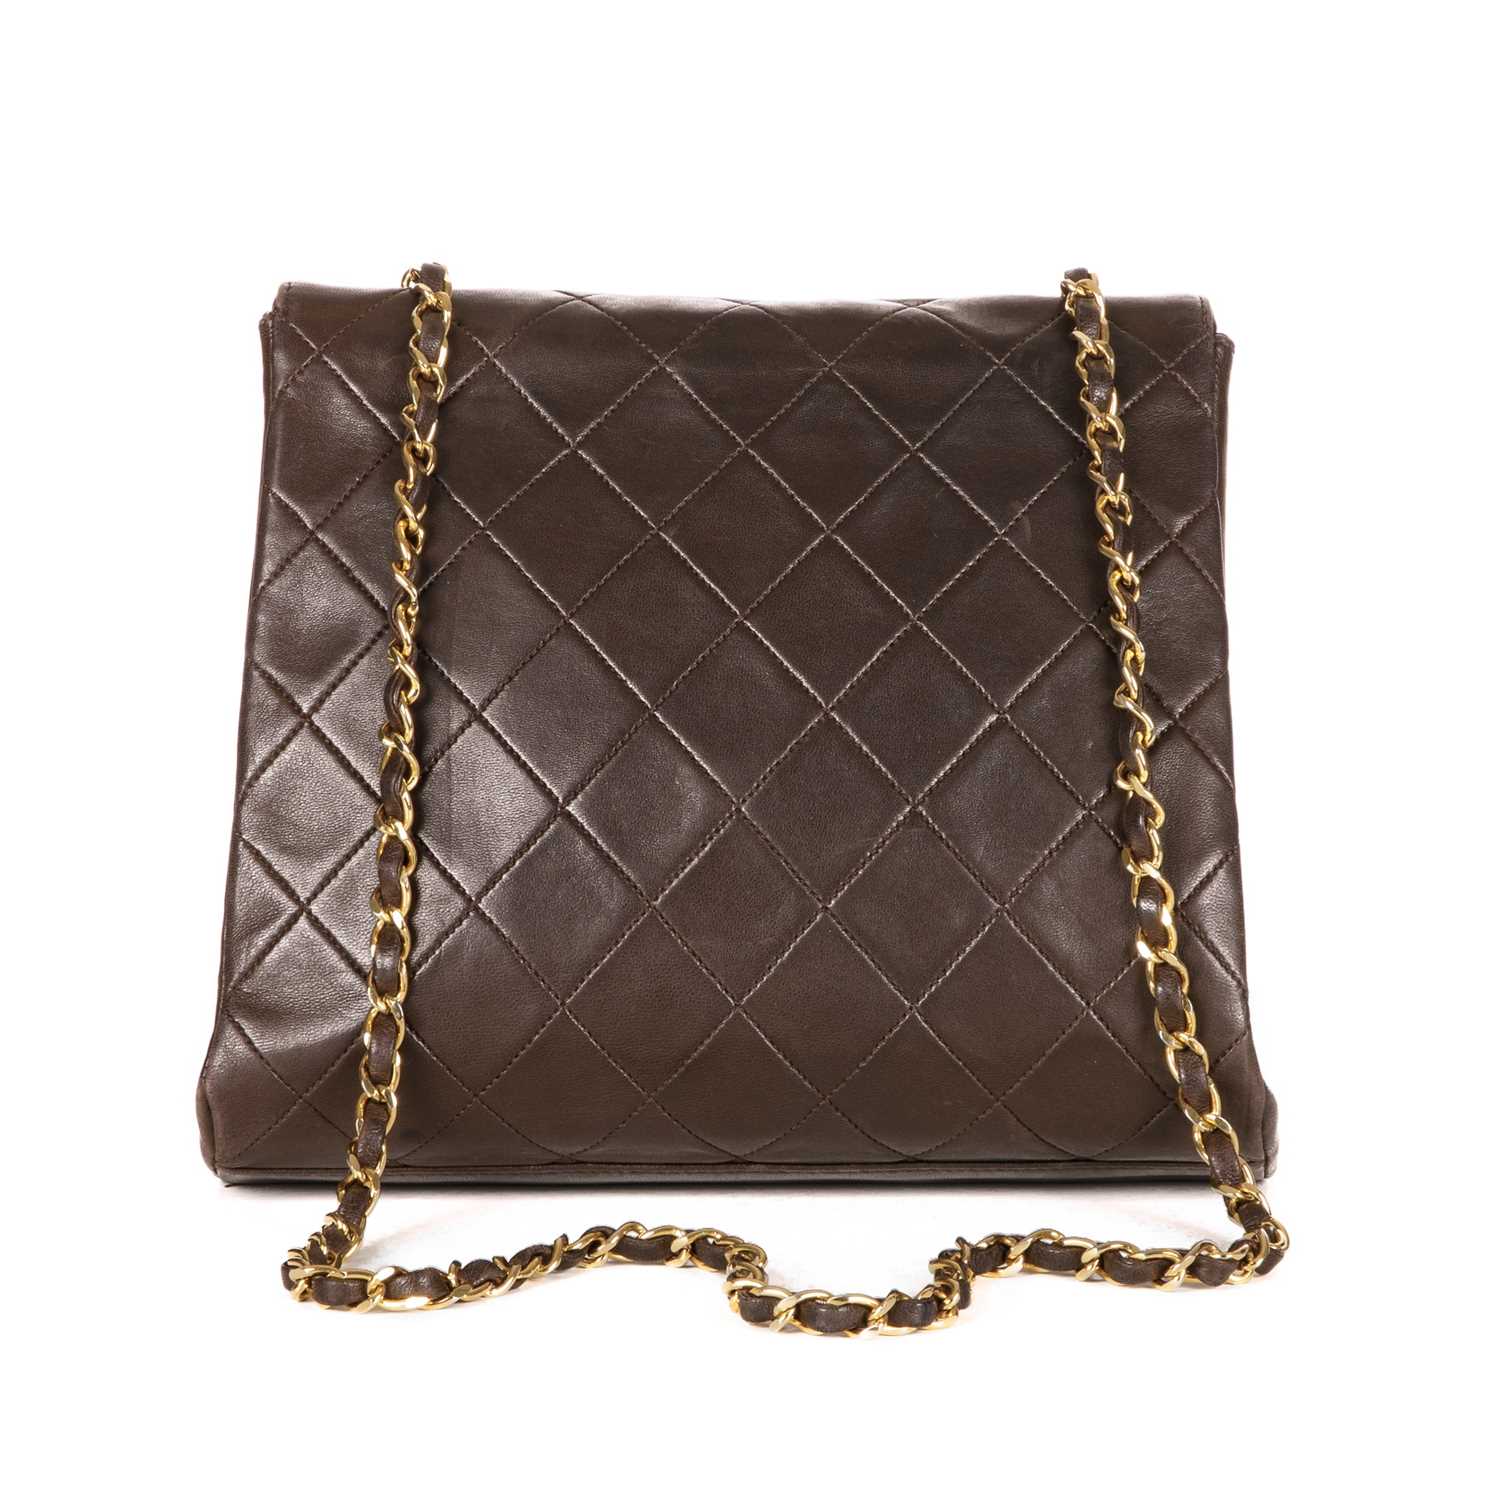 Chanel, a vintage Single Flap handbag, designed with a diamond quilted brown lambskin leather - Image 2 of 4